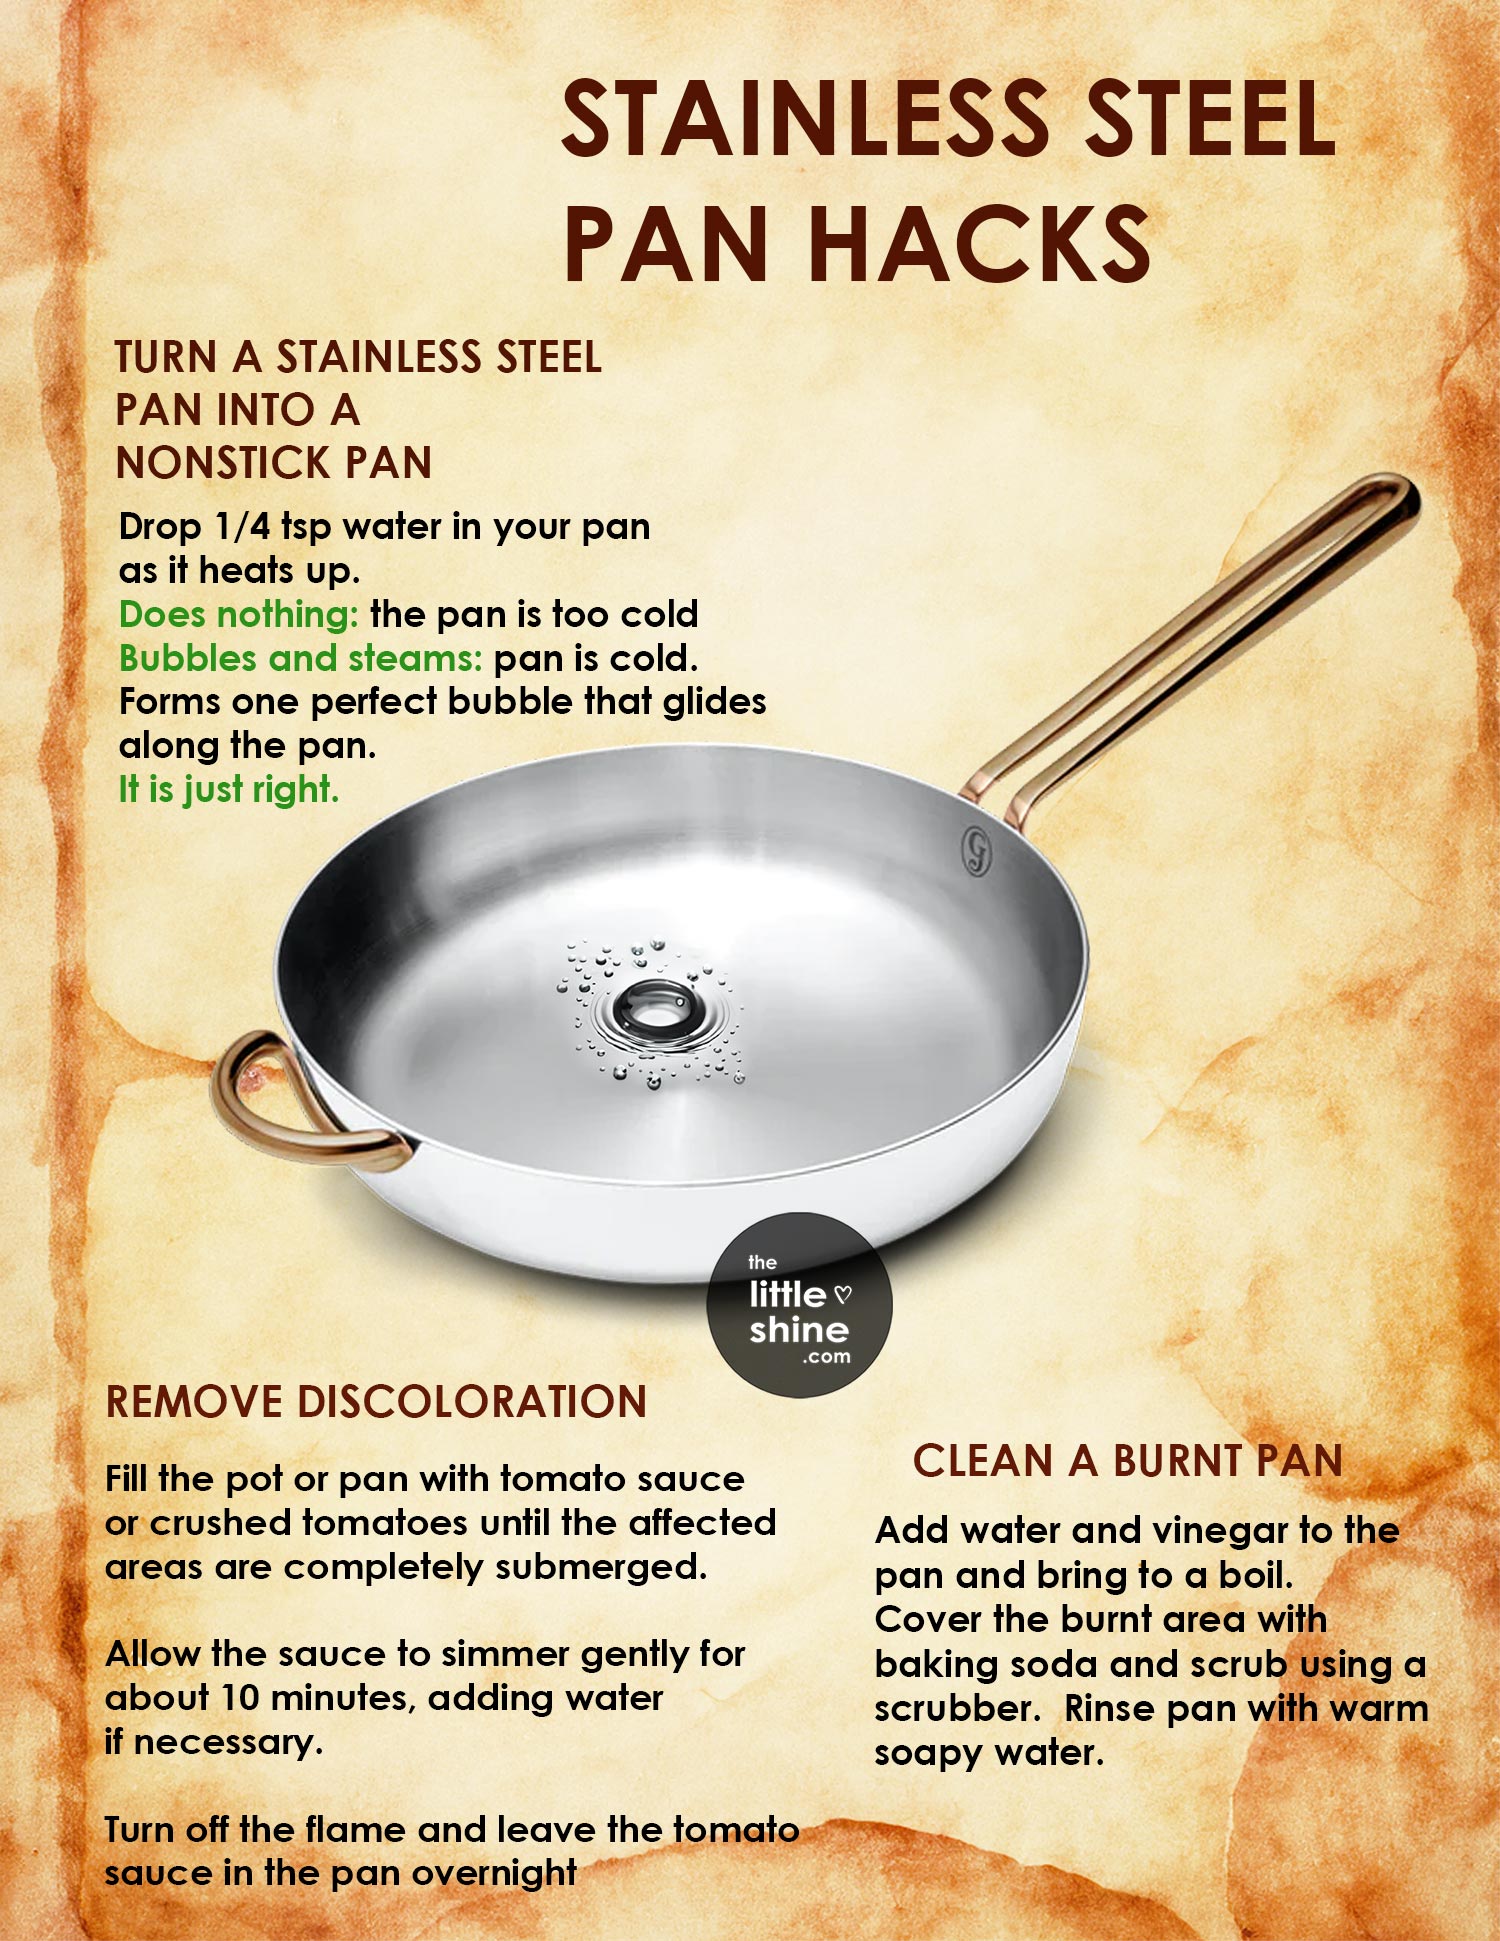 Make stainless steel into a nonstick pan with these simple hacks